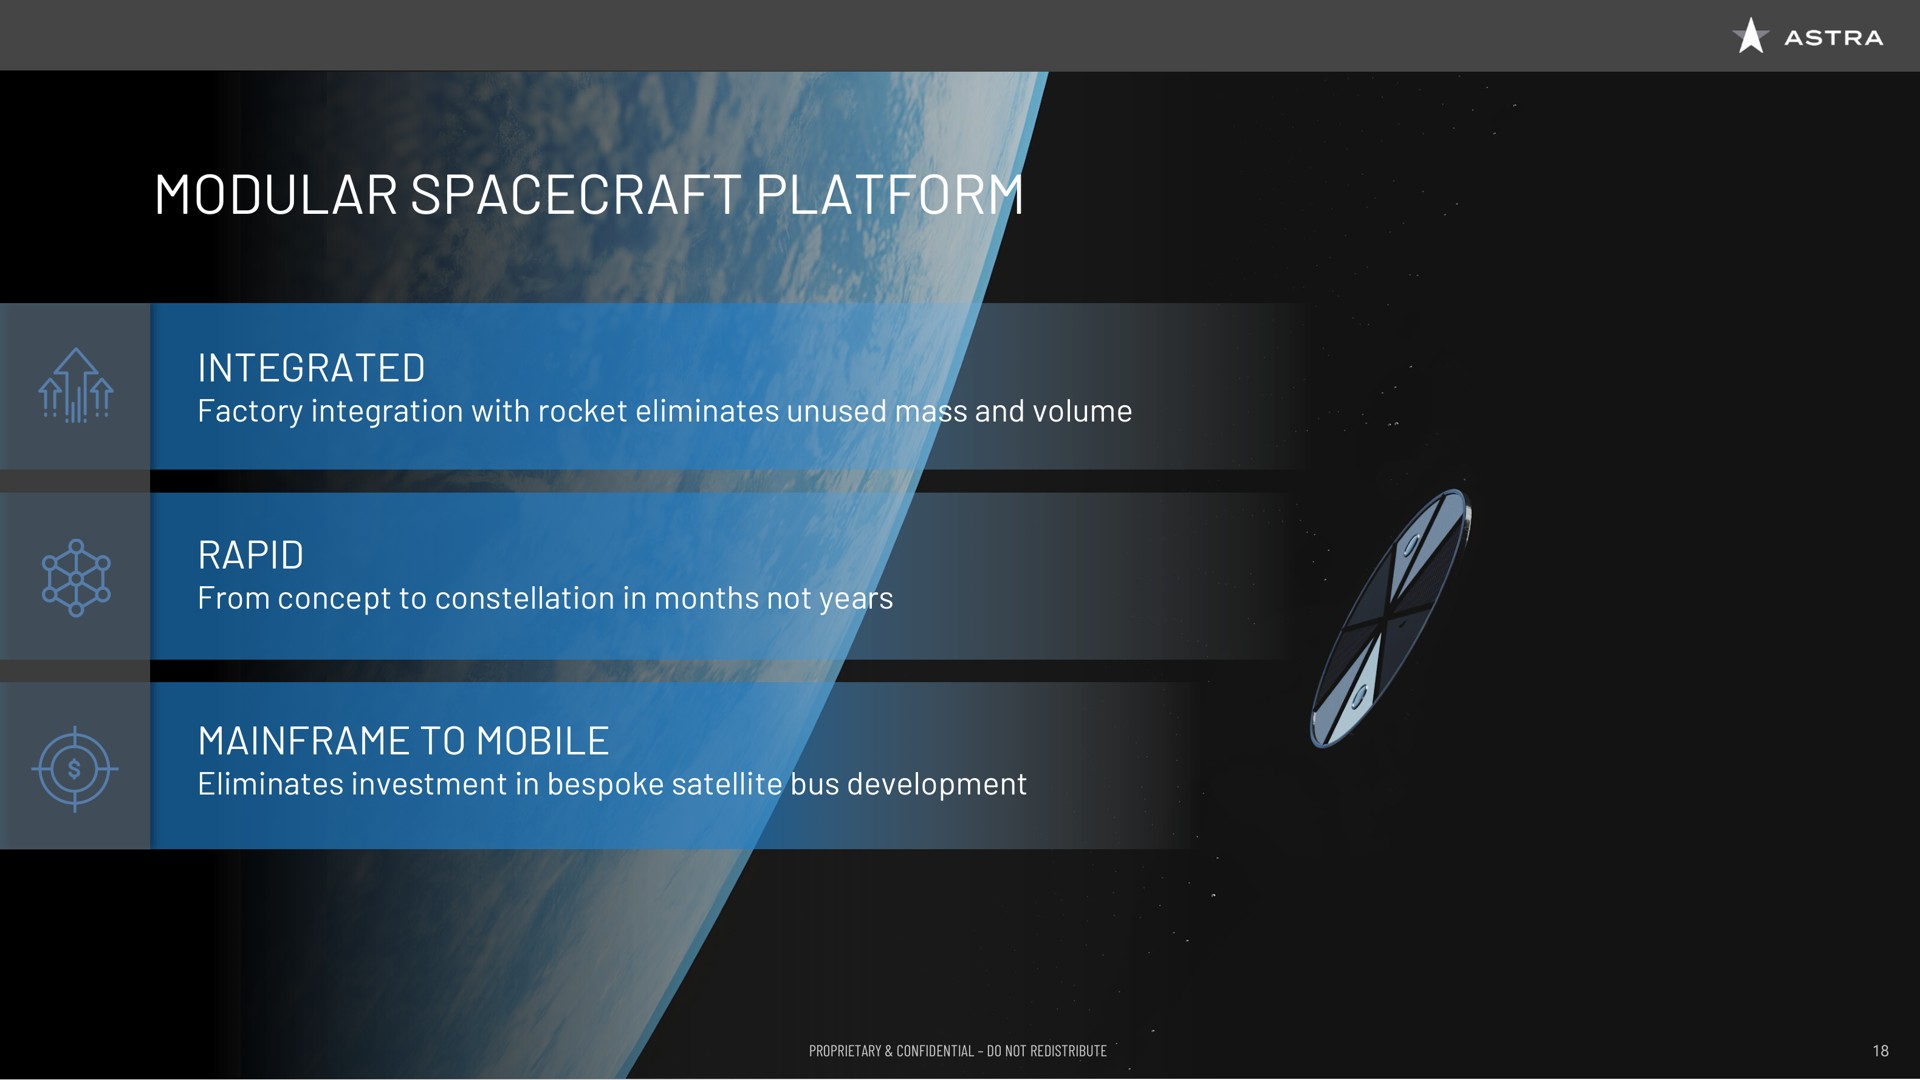 modular platform integrated factory integration with rocket eliminates unused mass and volume rapid from concept to constellation in months not years to mobile eliminates investment in bespoke satellite bus development | Astra